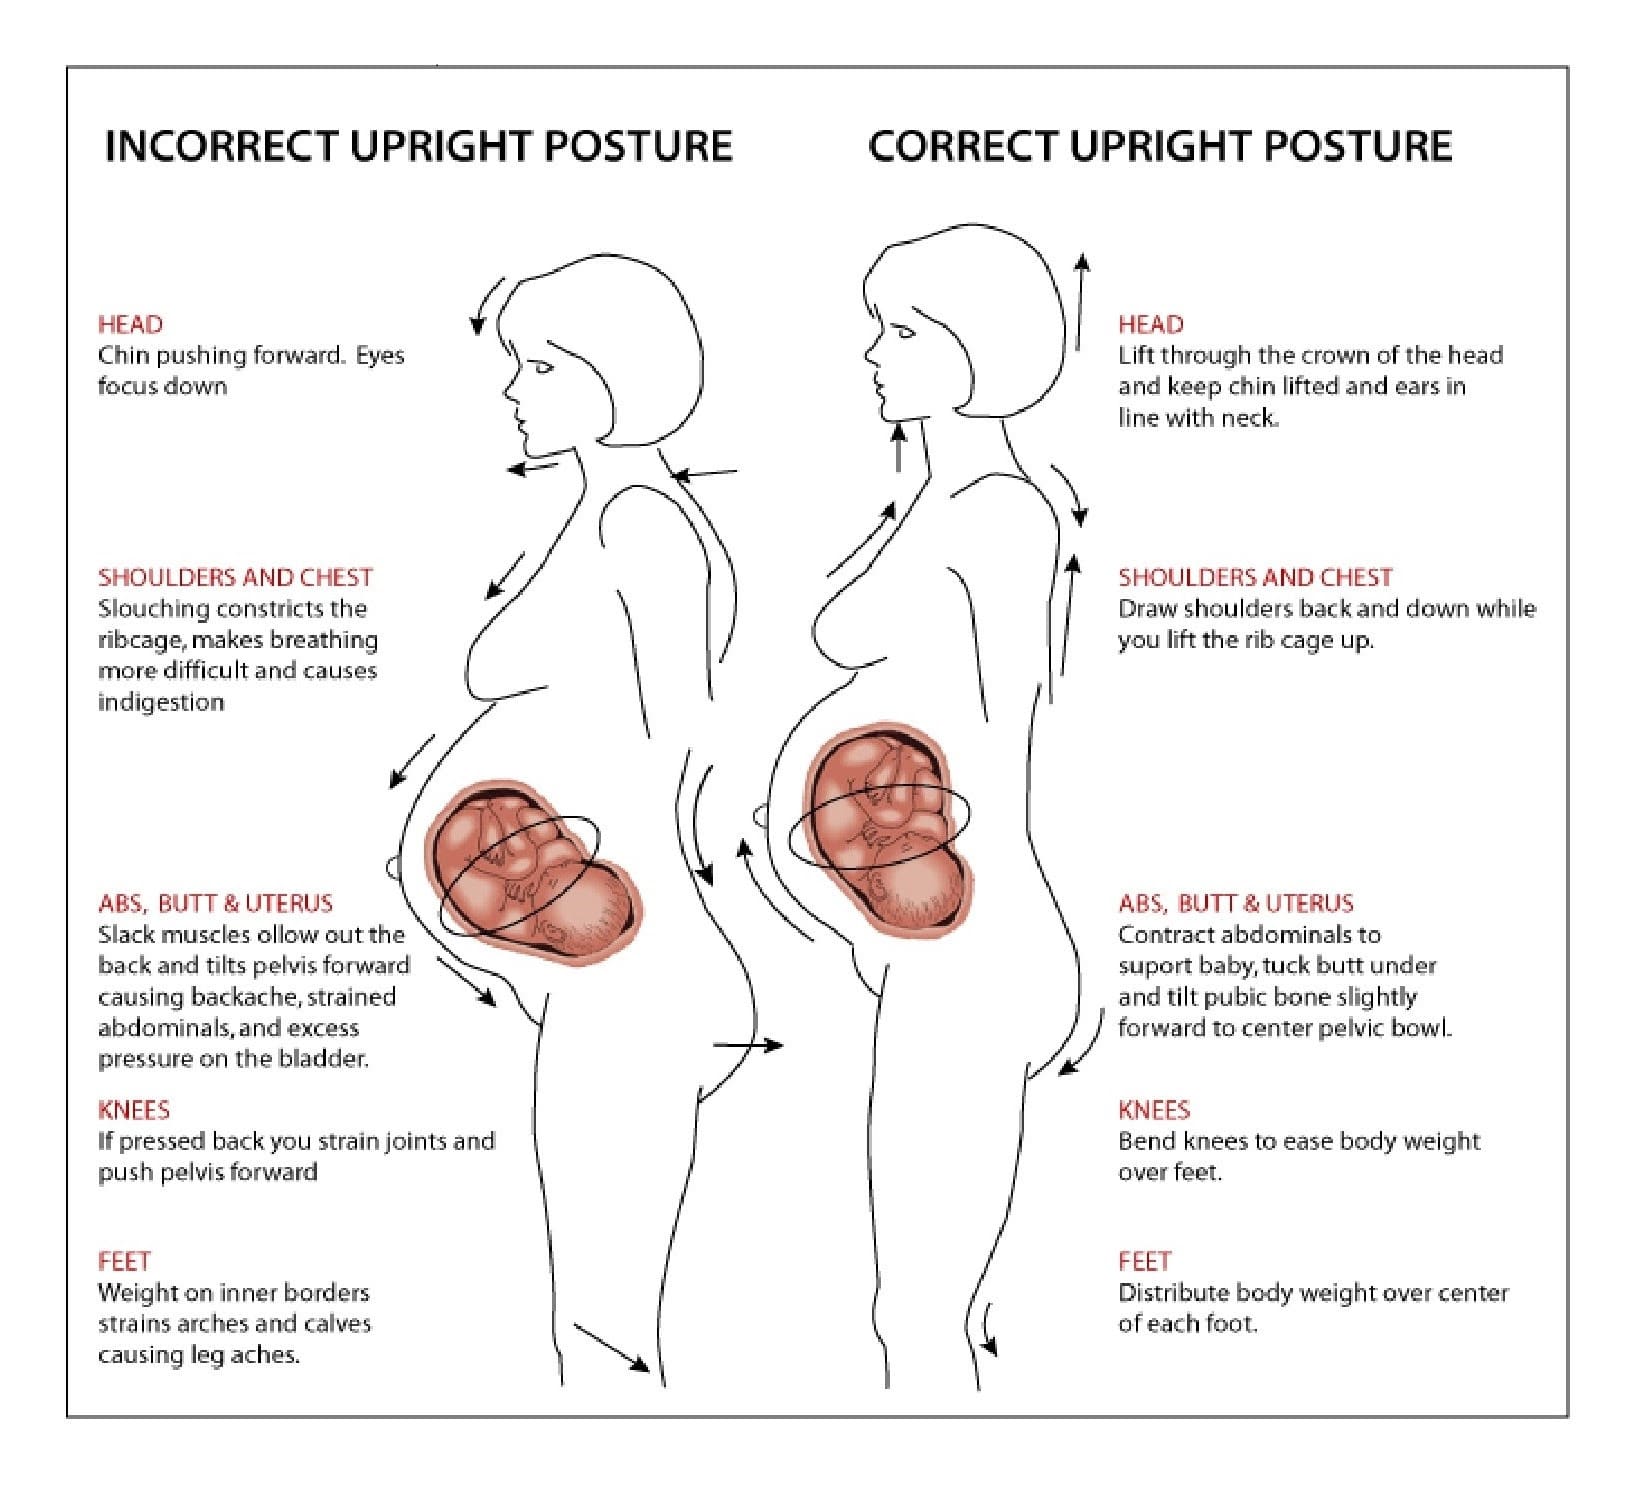 What Happens To The Bladder During Pregnancy